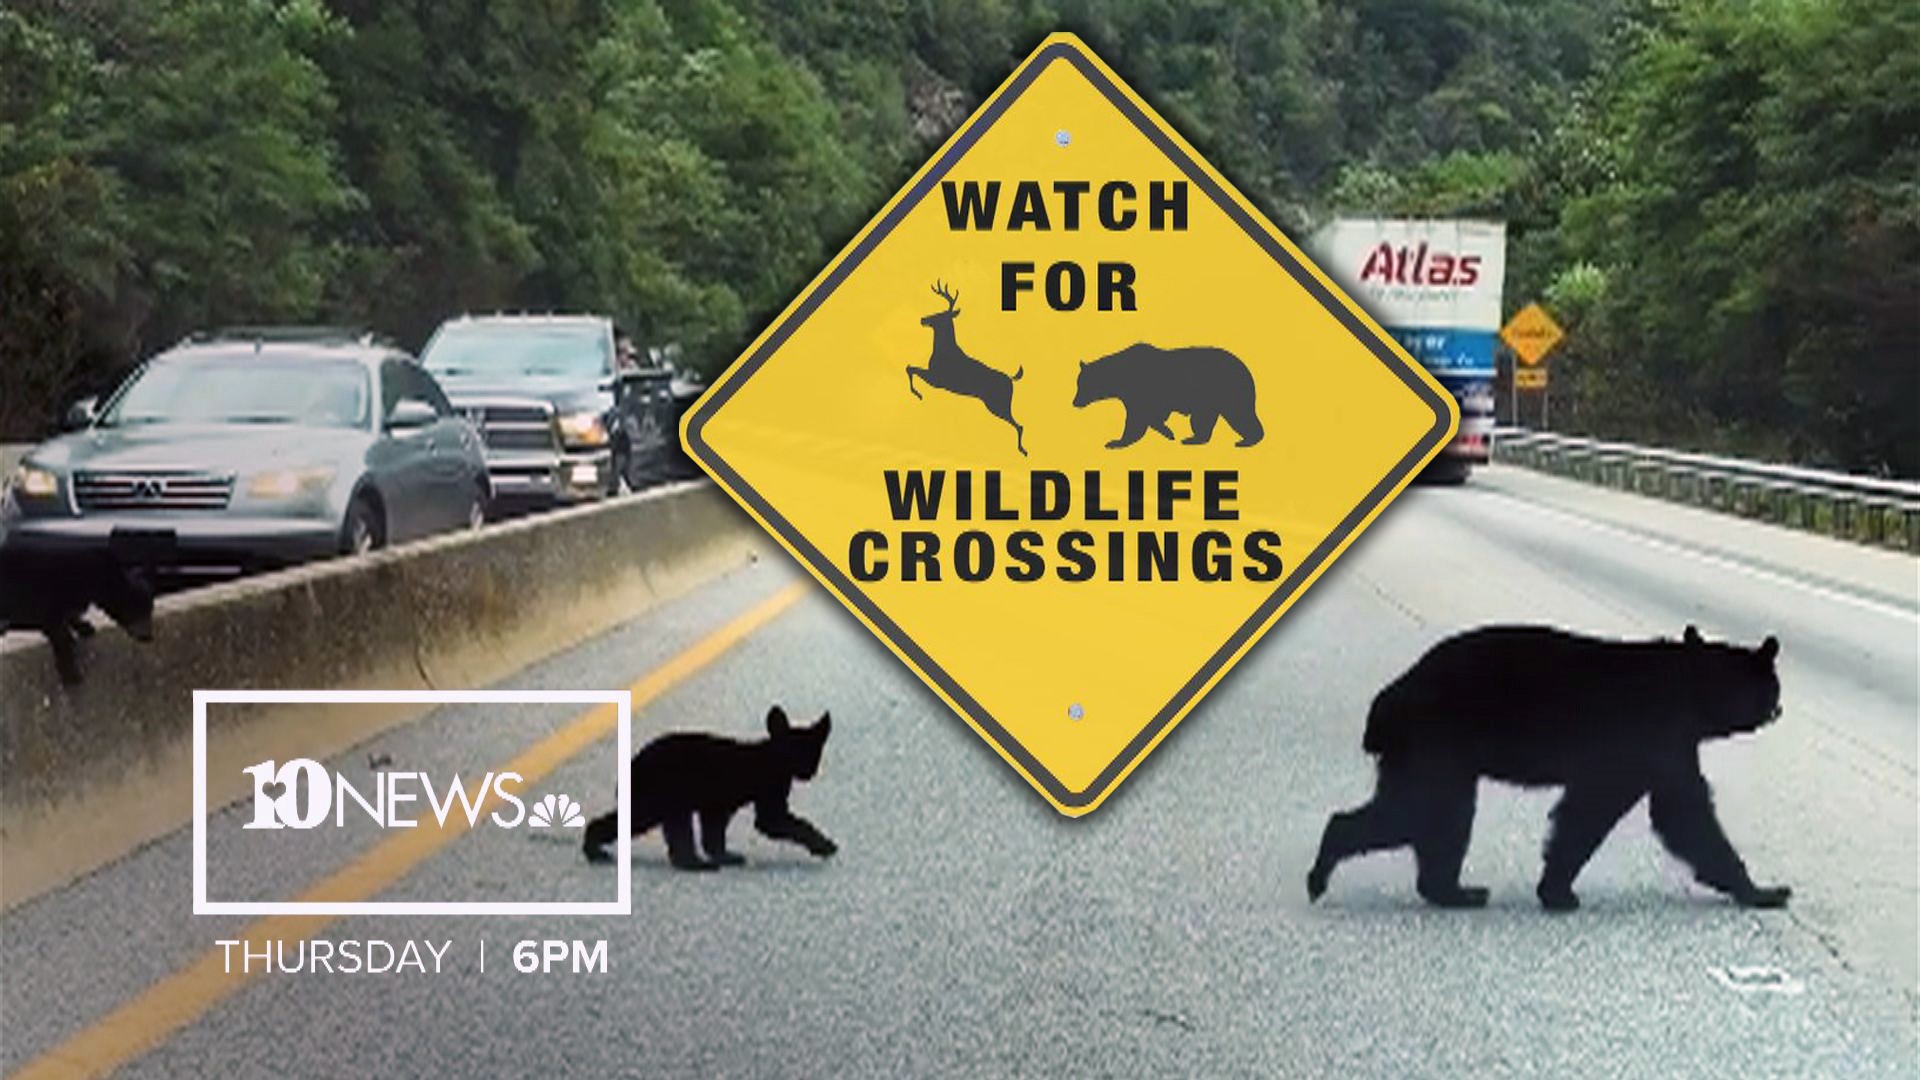 Watch 10News at 6 p.m. on Nov. 7, 2019 to see how researchers hope to create safe passages on part of I-40 considered a death trap for bears, elk and other wildlife.